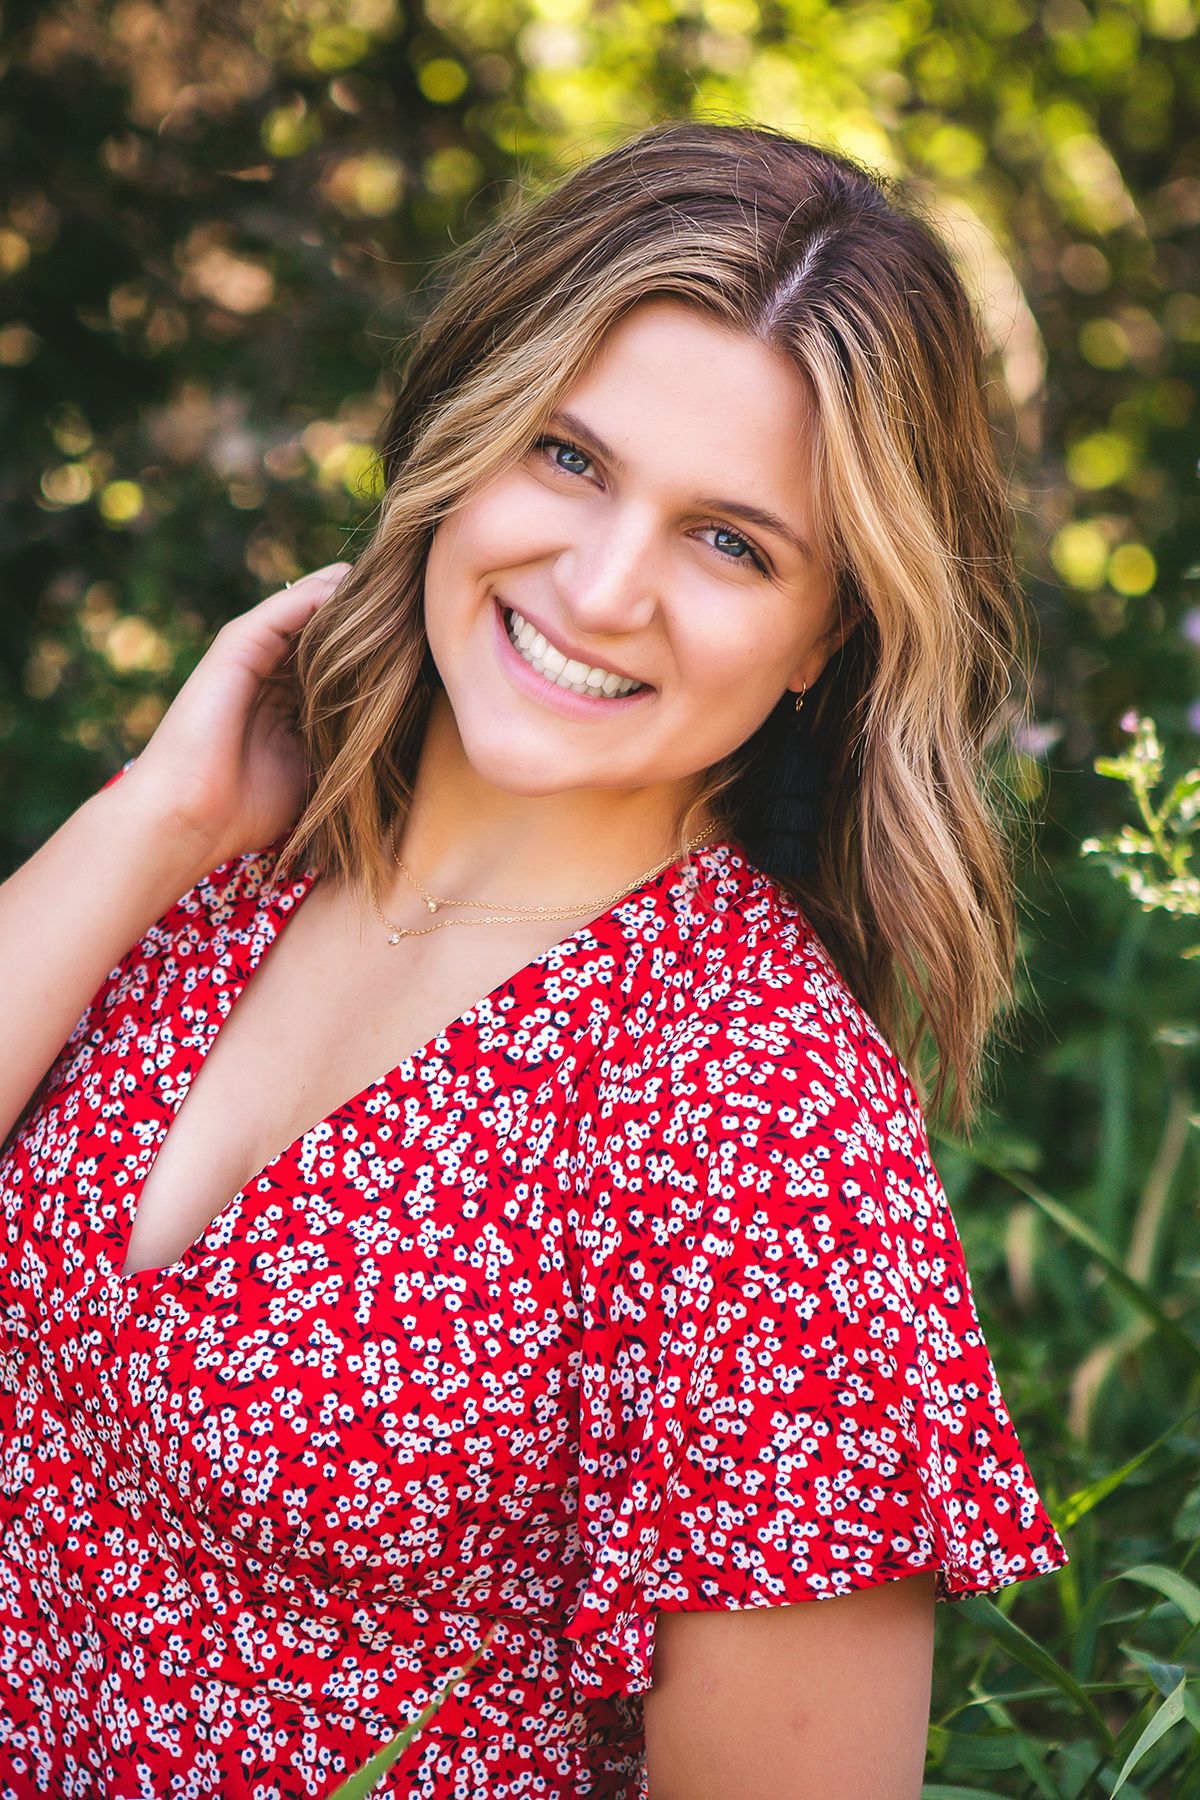 Sara Graham, a member of the Cheney High School graduating class this year, says she hopes sharing her past experience with depression can help others.  (Courtesy)